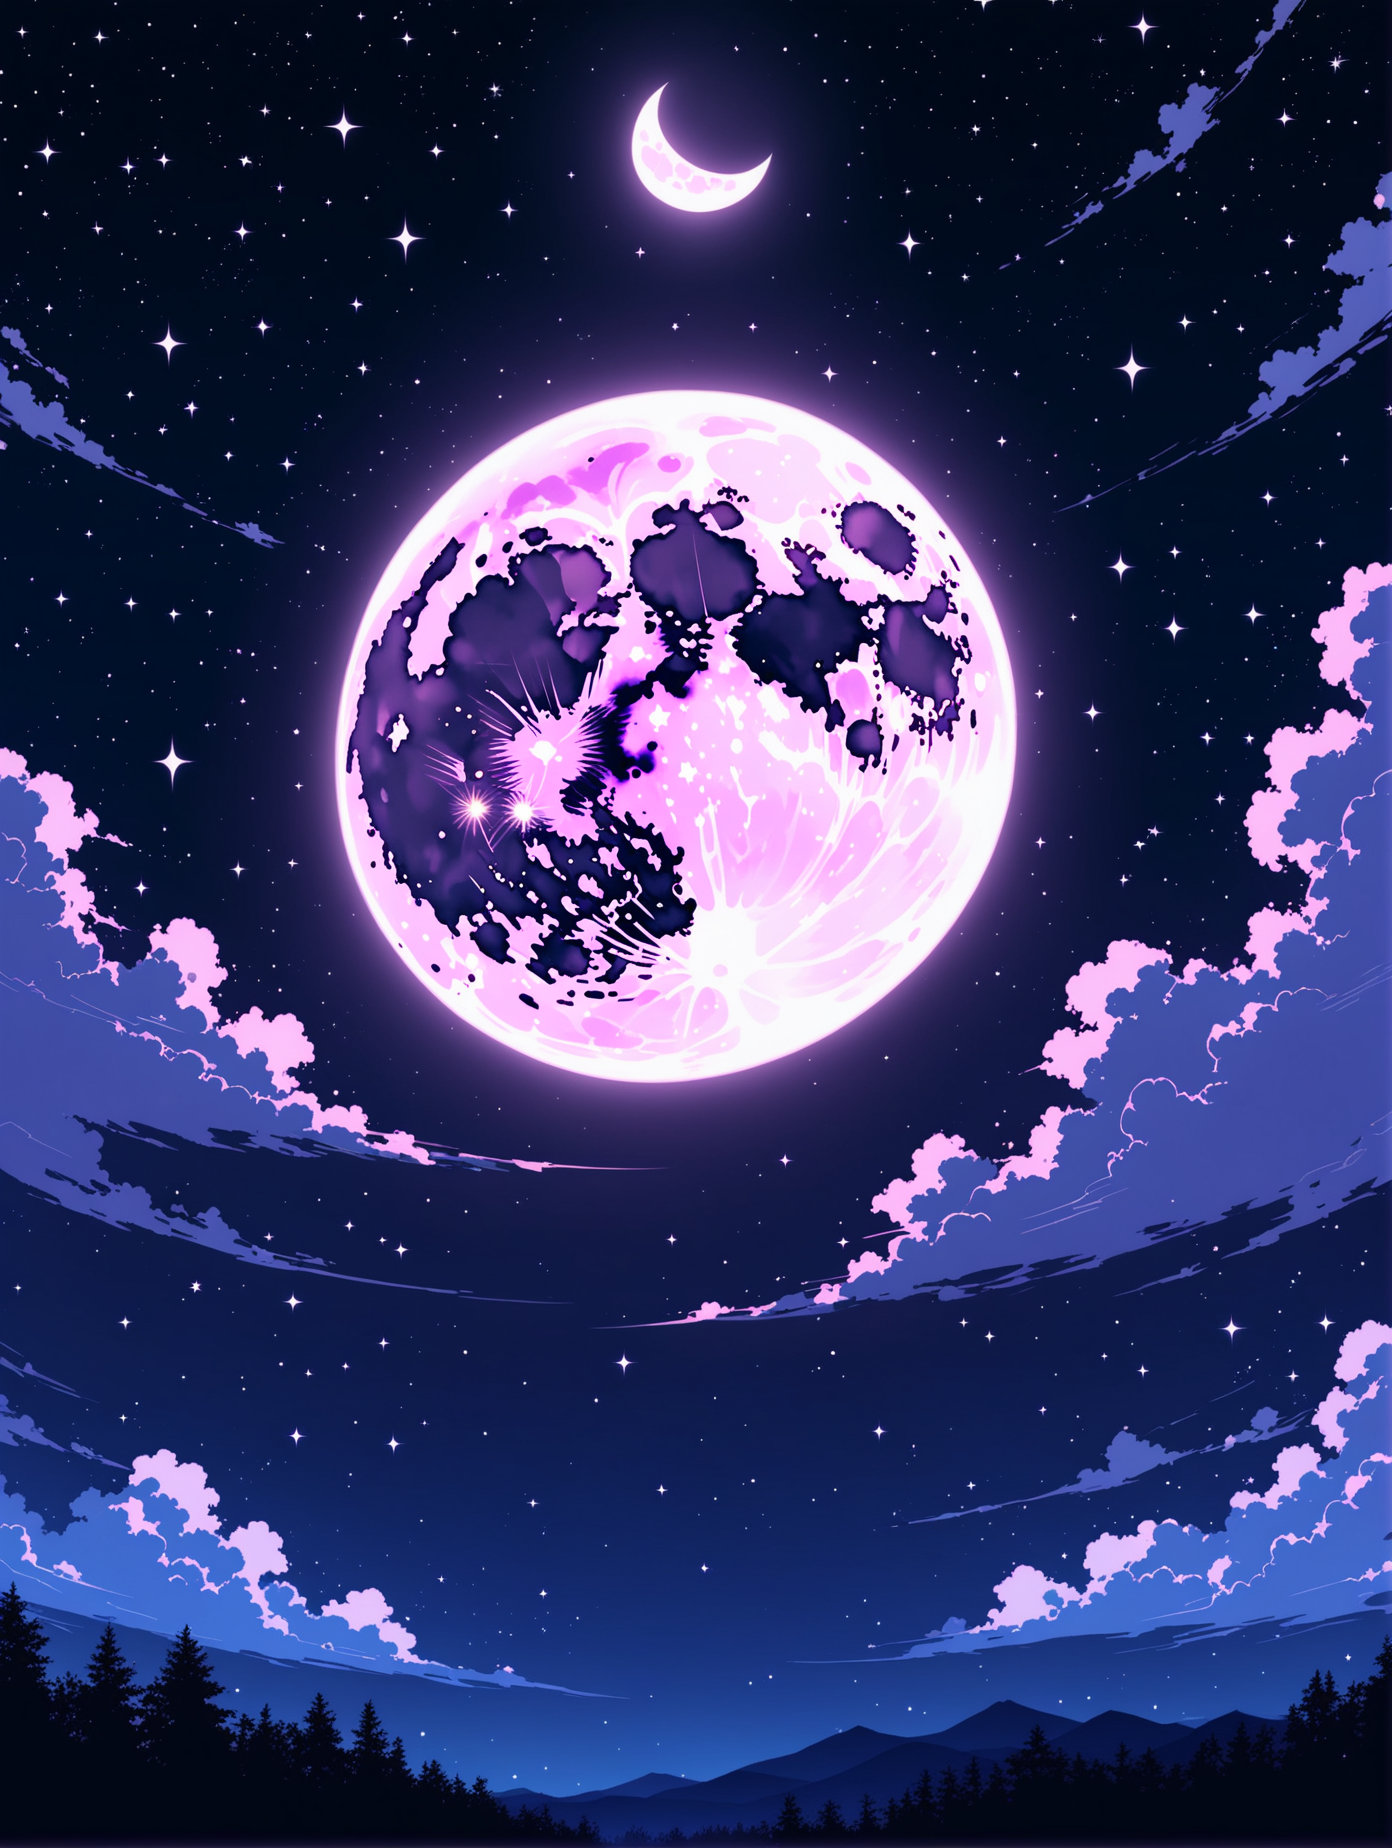 moon and night time aesthetic wallpaper